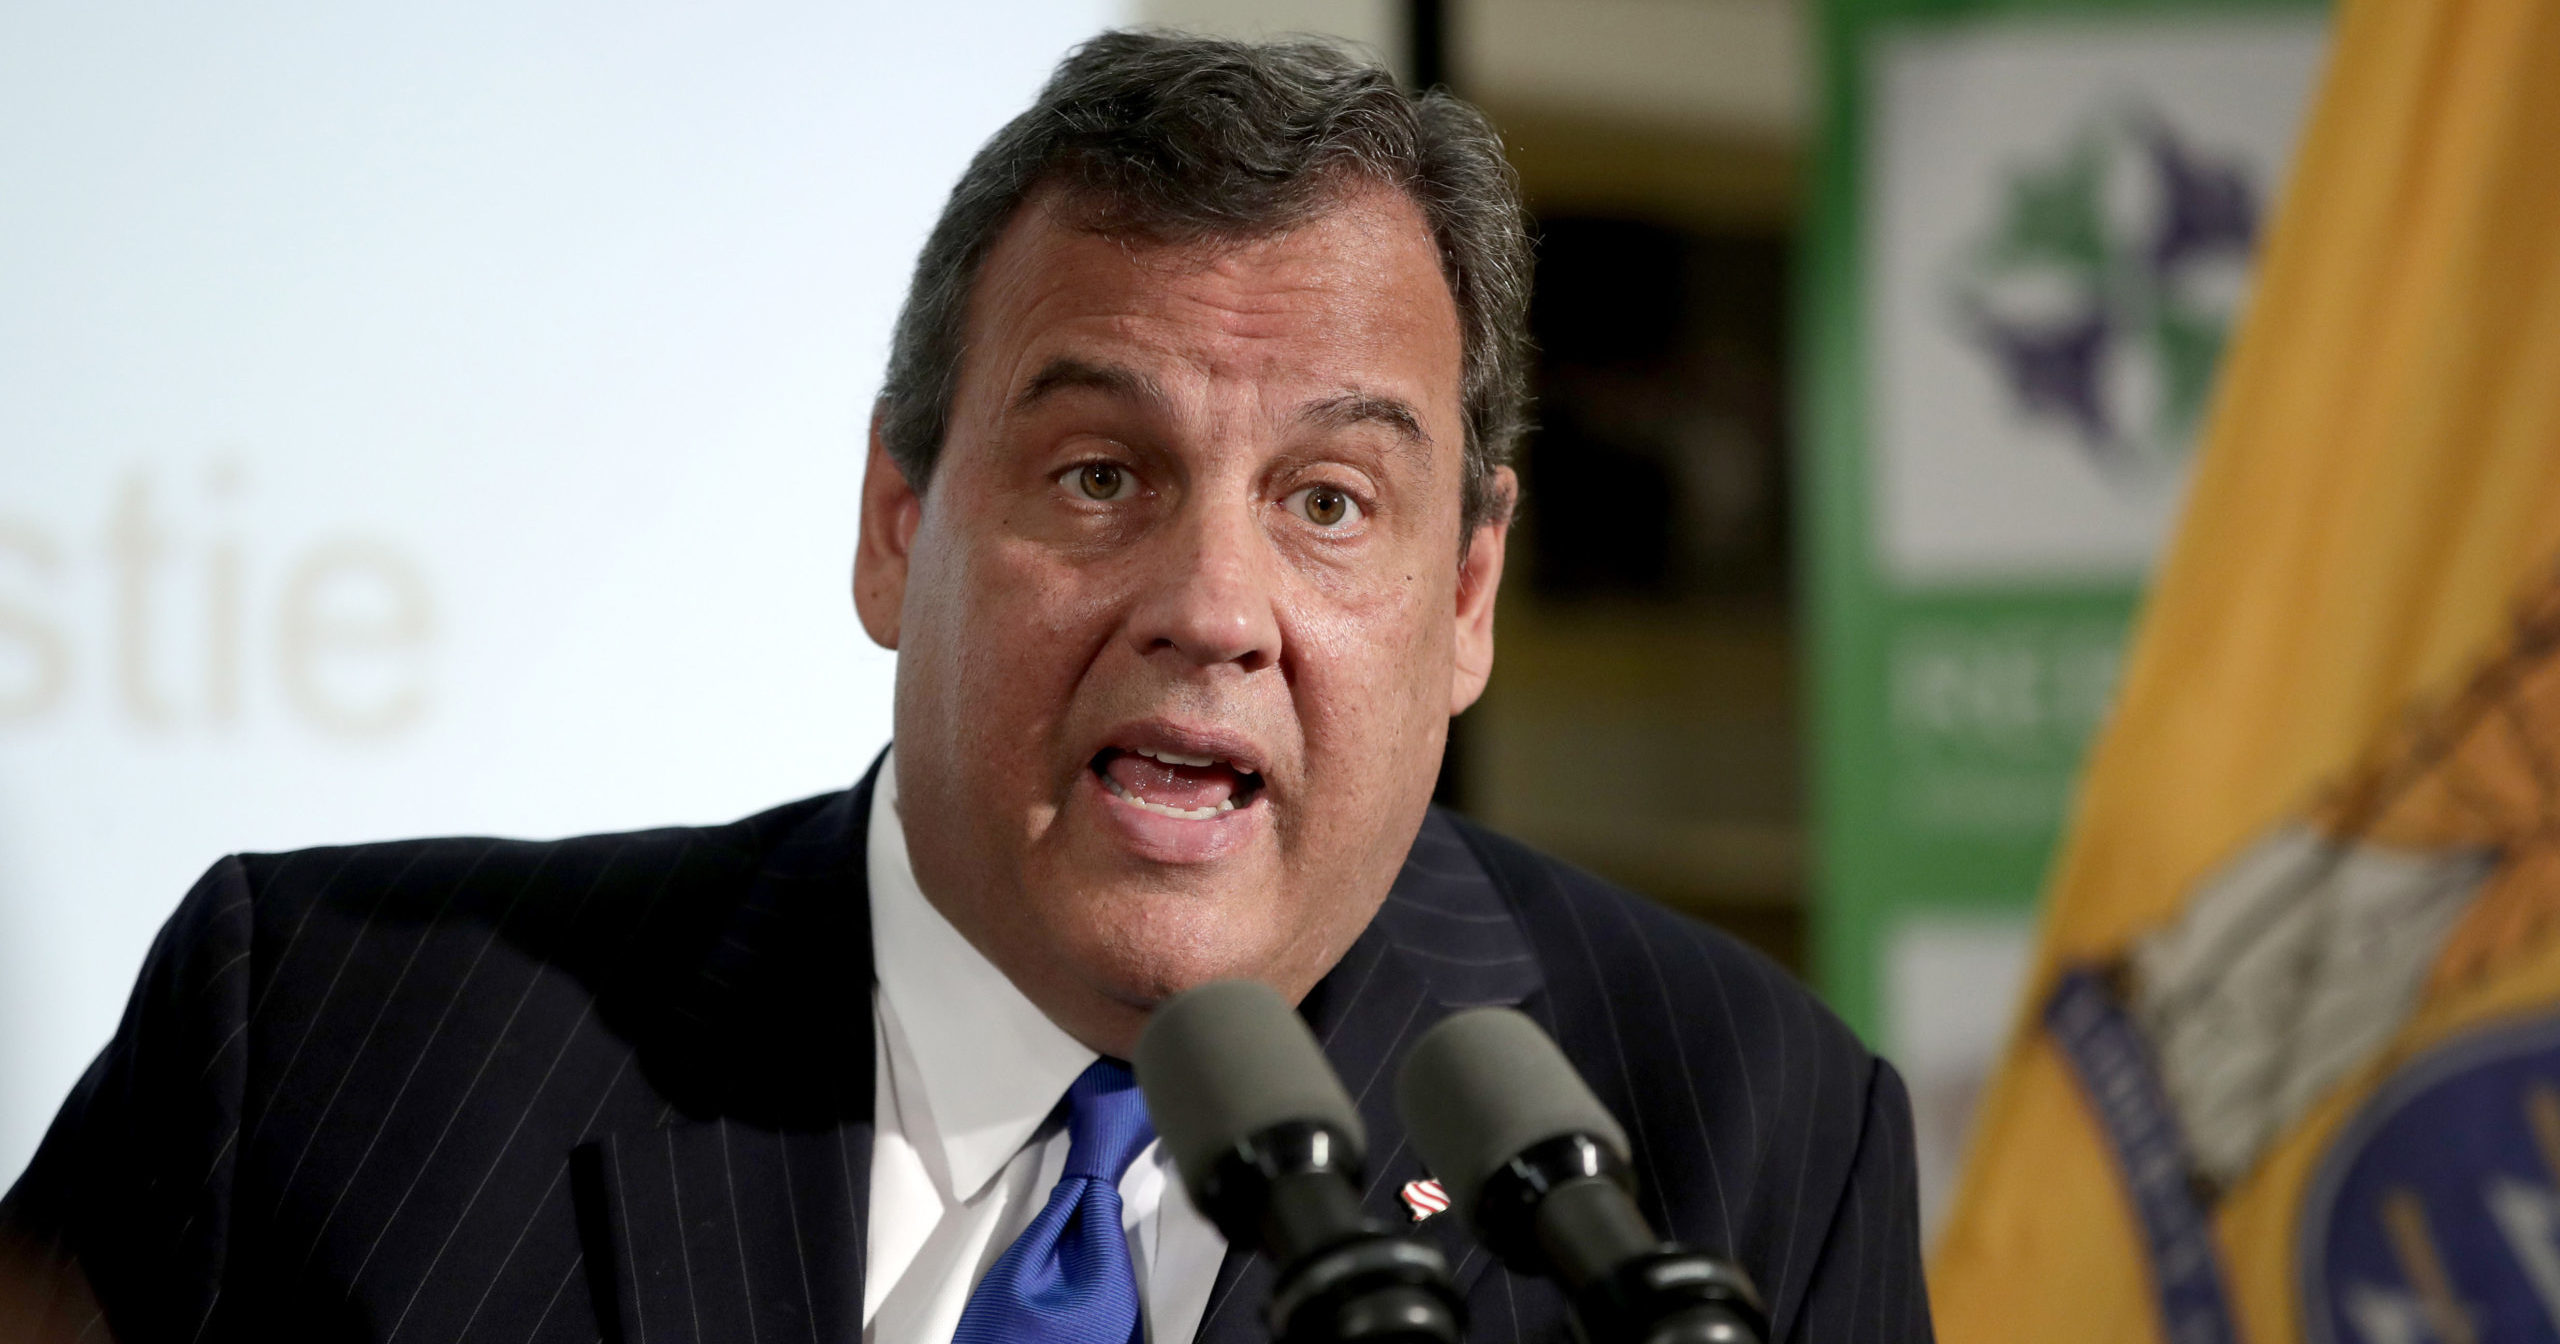 In this Nov. 29, 2017, file photo, New Jersey Gov. Chris Christie speaks during a news conference in Newark, New Jersey. Christie announced on Oct. 3, 2020, that he has tested positive for COVID-19.